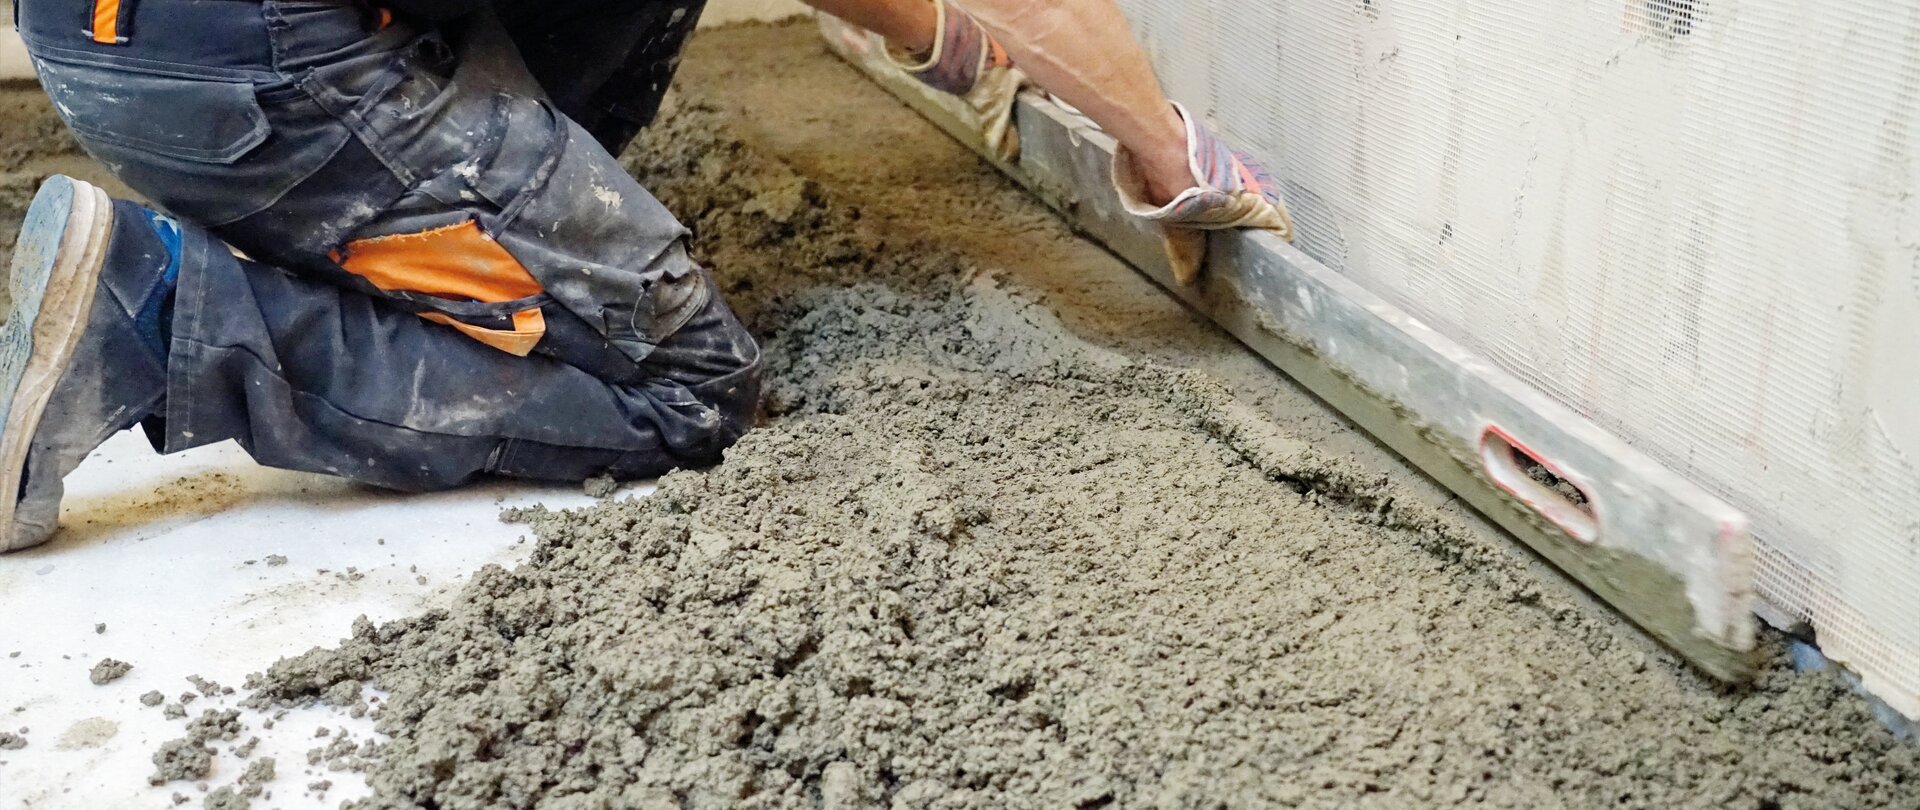 Lay cement screed and level it by hand using the leveling bar